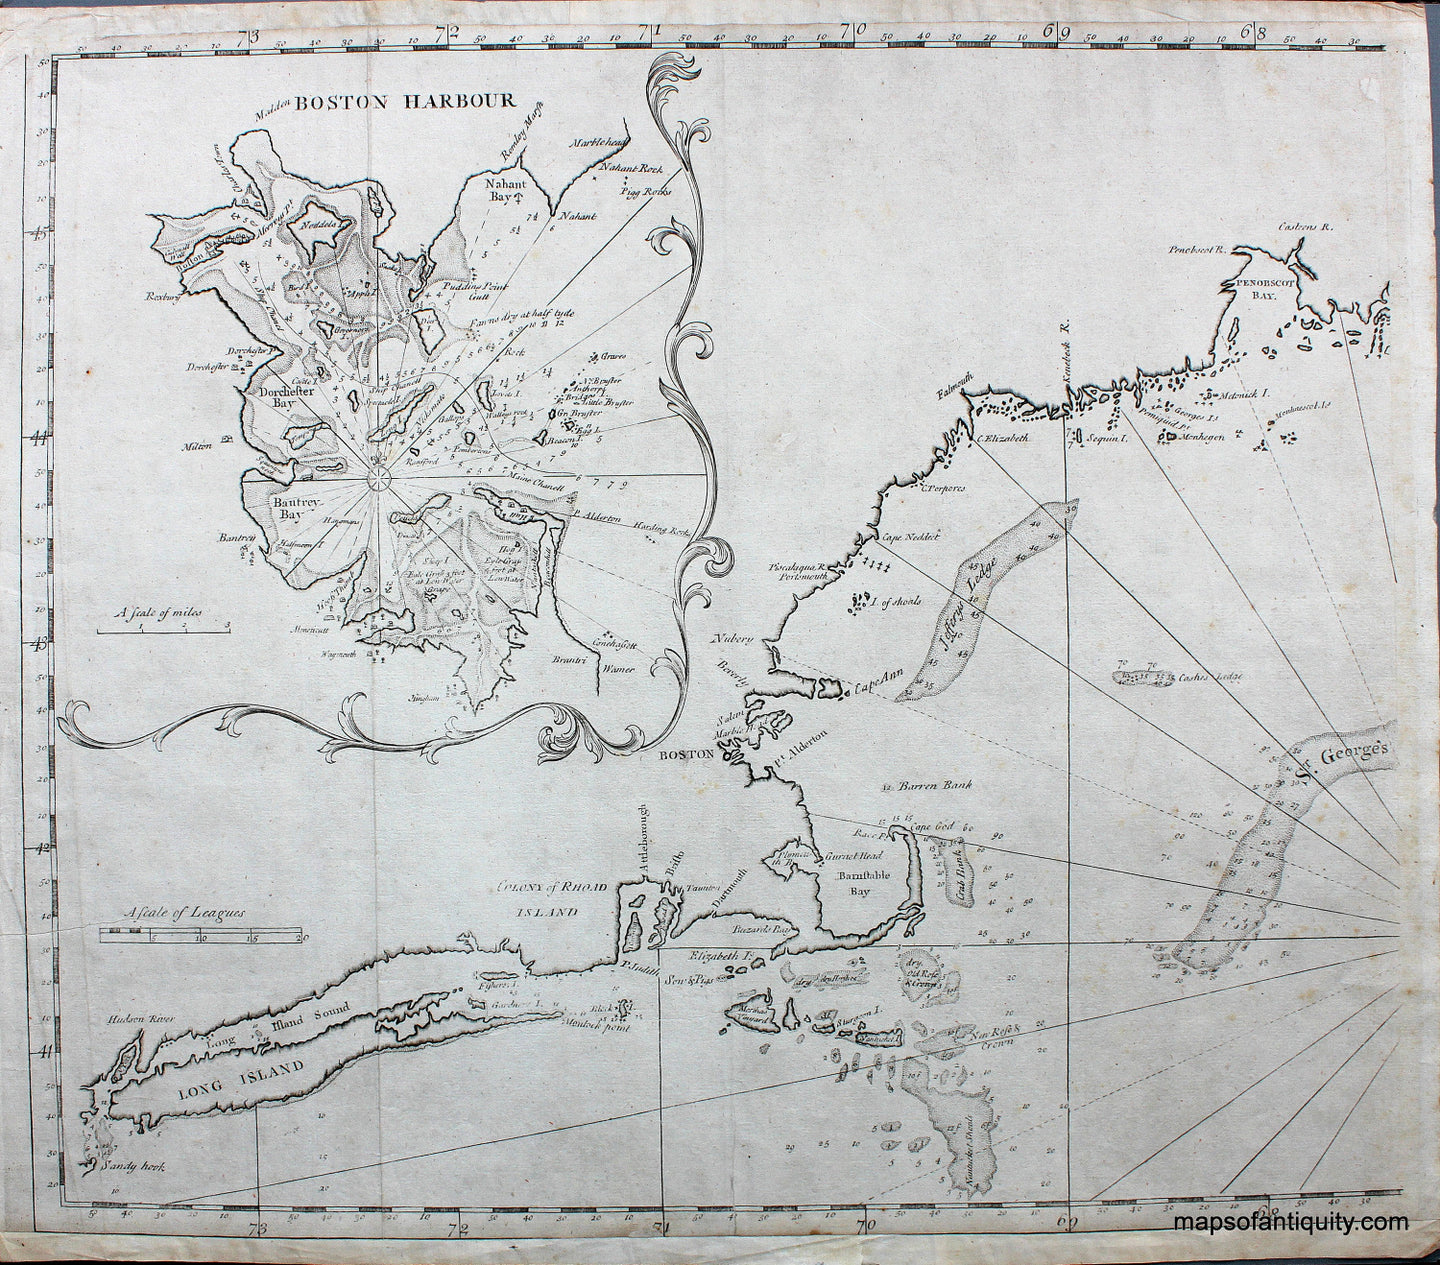 '-Southack-Map---Northeast-United-States**********-United-States-Northeast-1730-(circa-1730)-Southack-Maps-Of-Antiquity